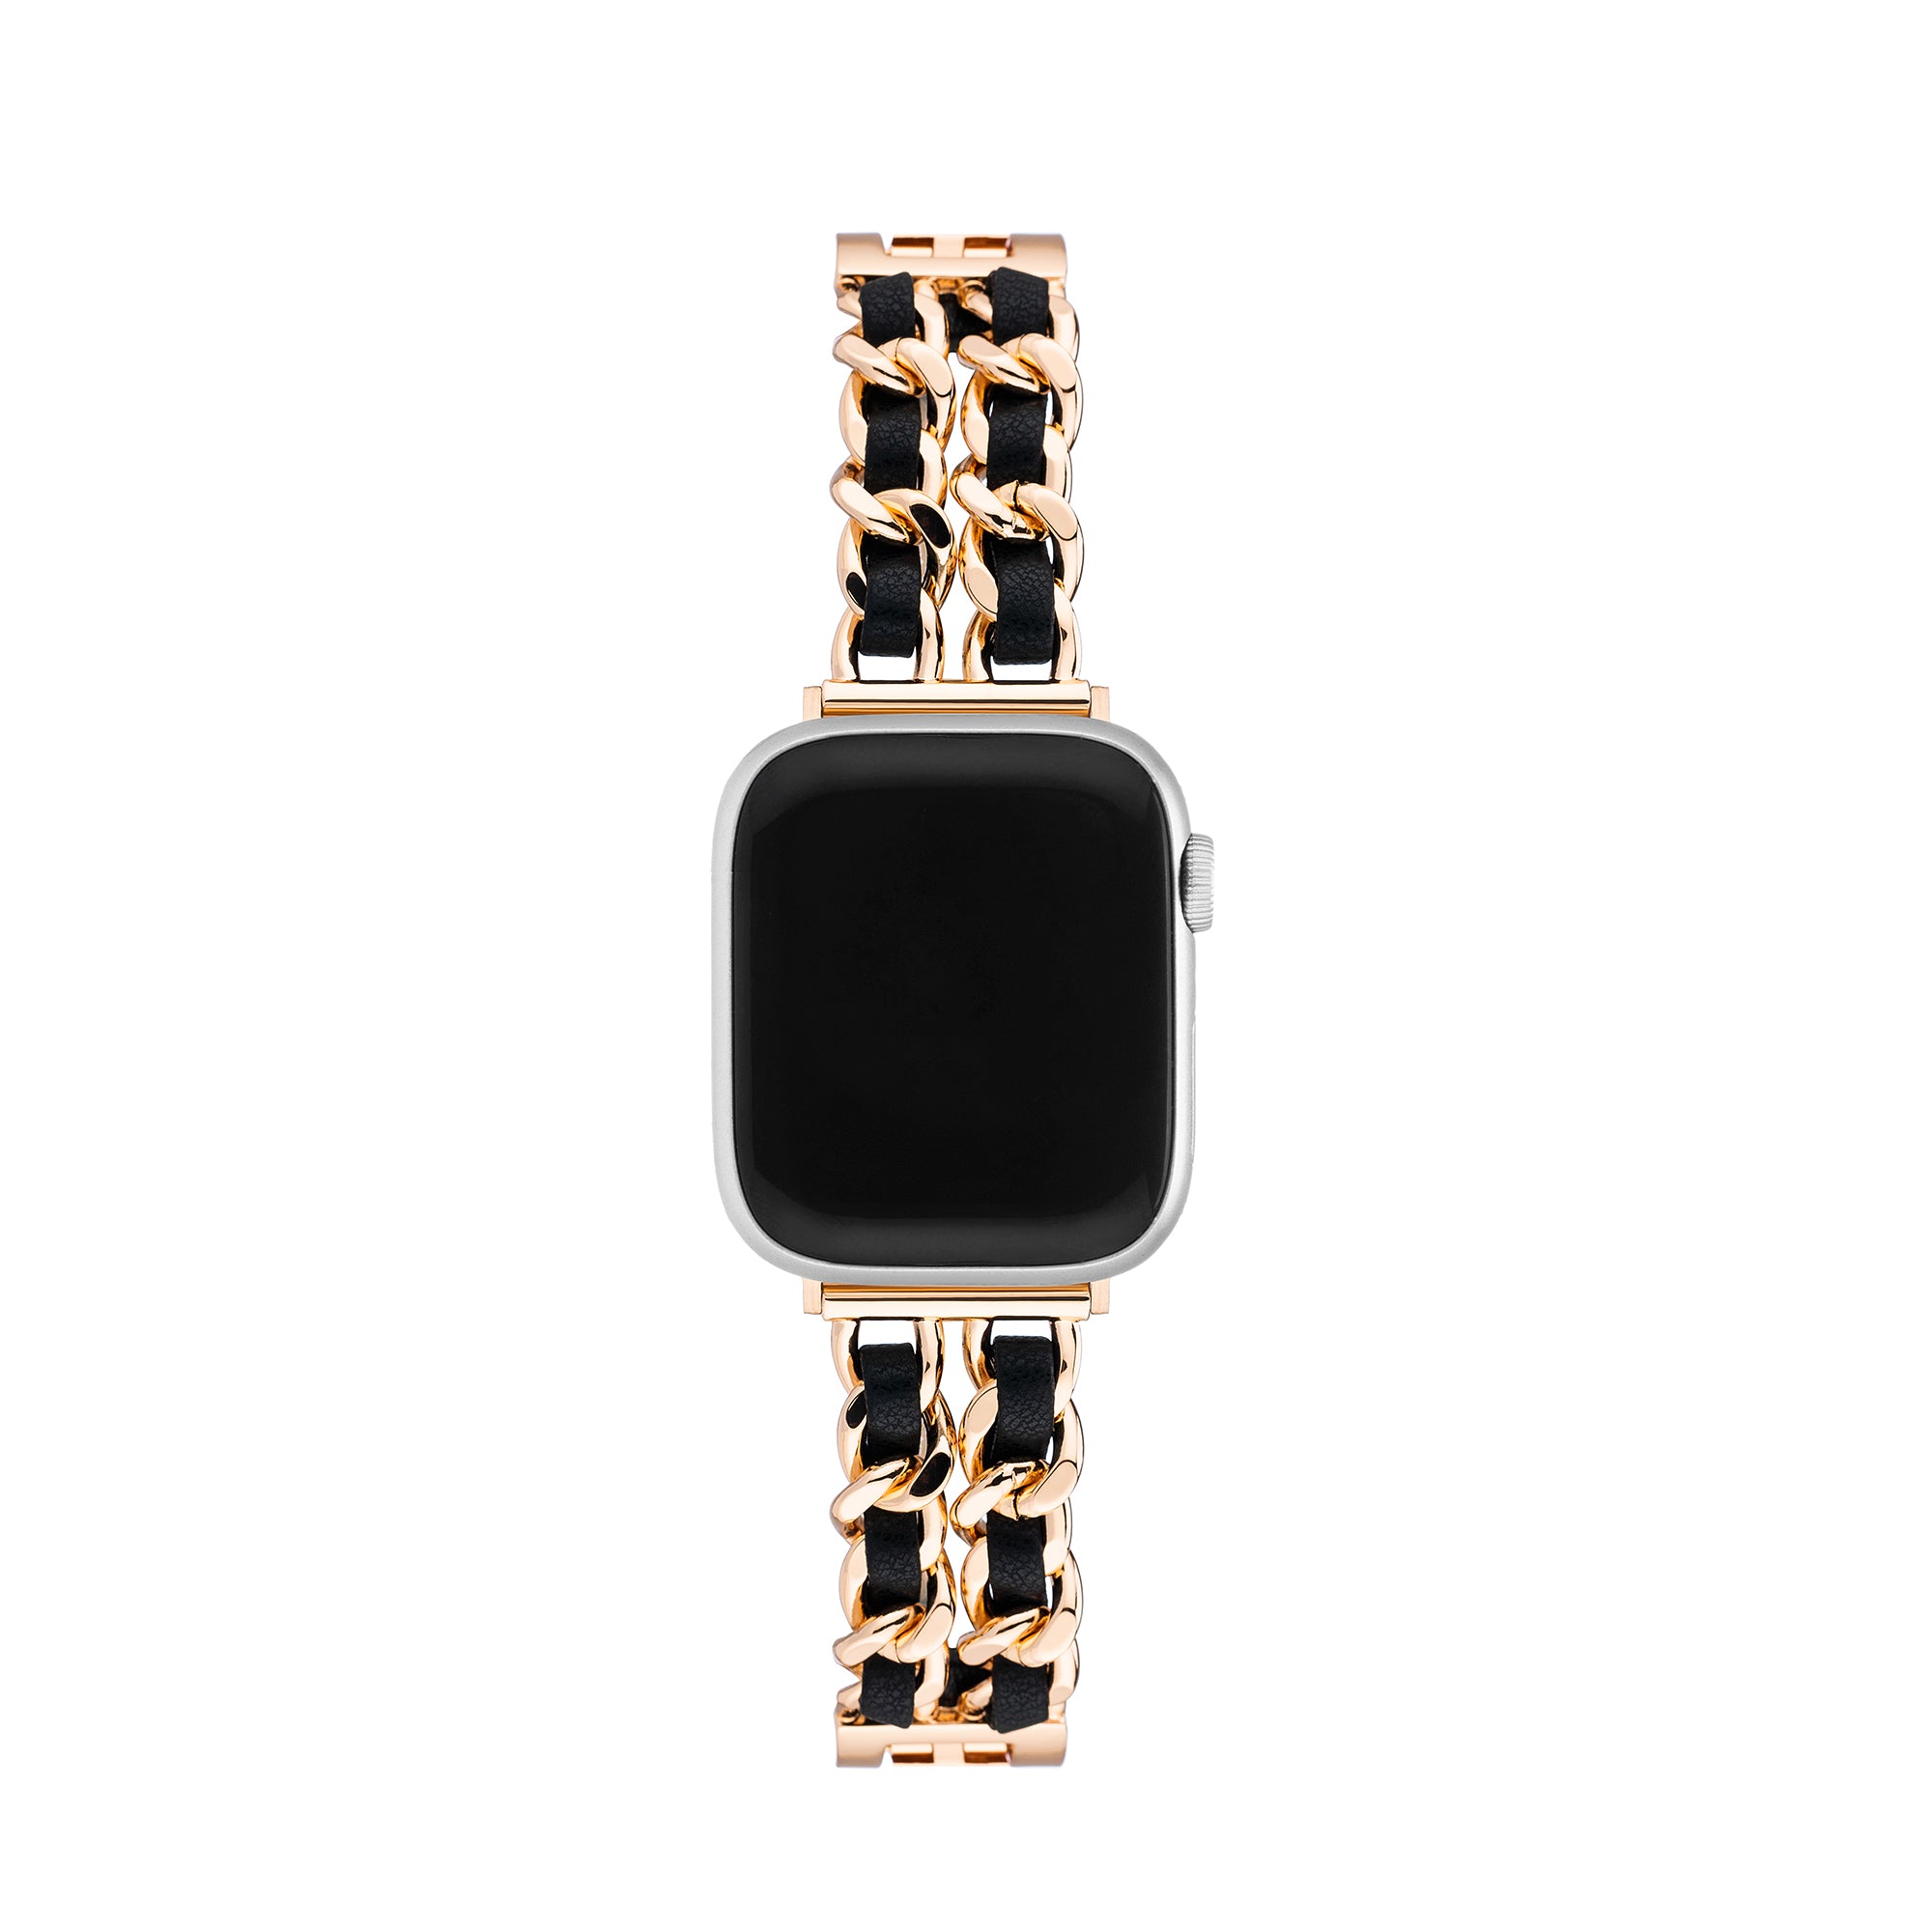 Double-Twisted Metal Apple Watch Band